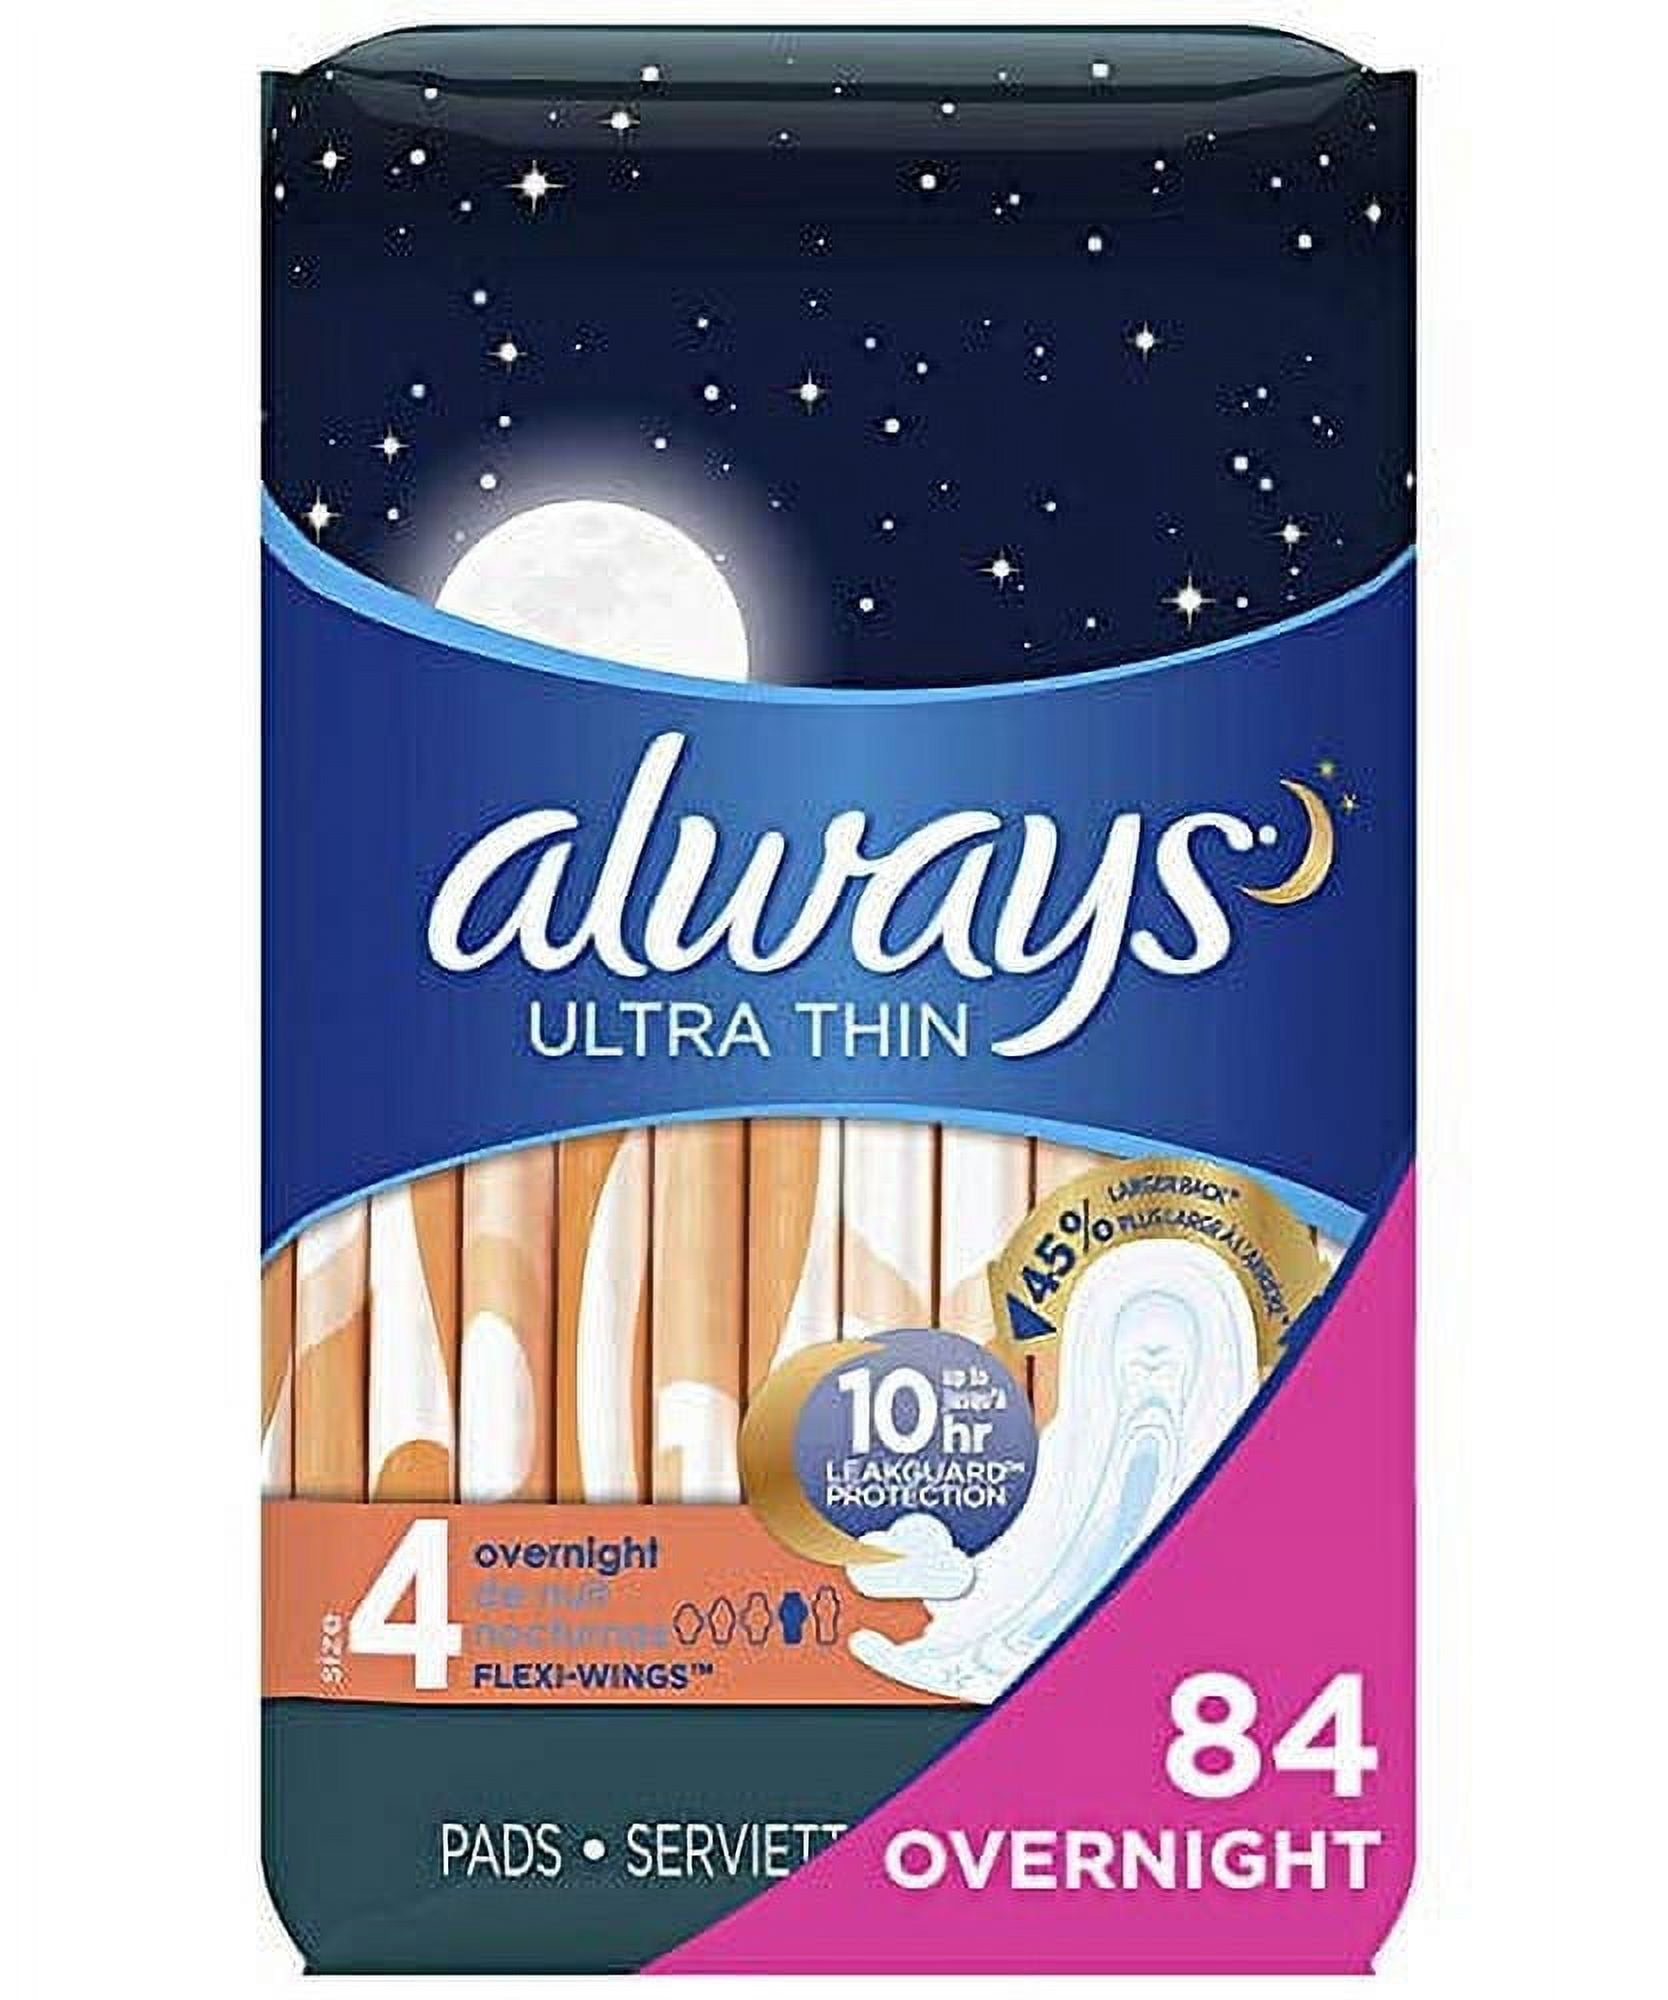  Always Ultra Thin Feminine Pads for Women, Size 5, Extra Heavy,  Overnight Absorbency with Wings, 46 Count x 2 (92 Count Total) : Health &  Household